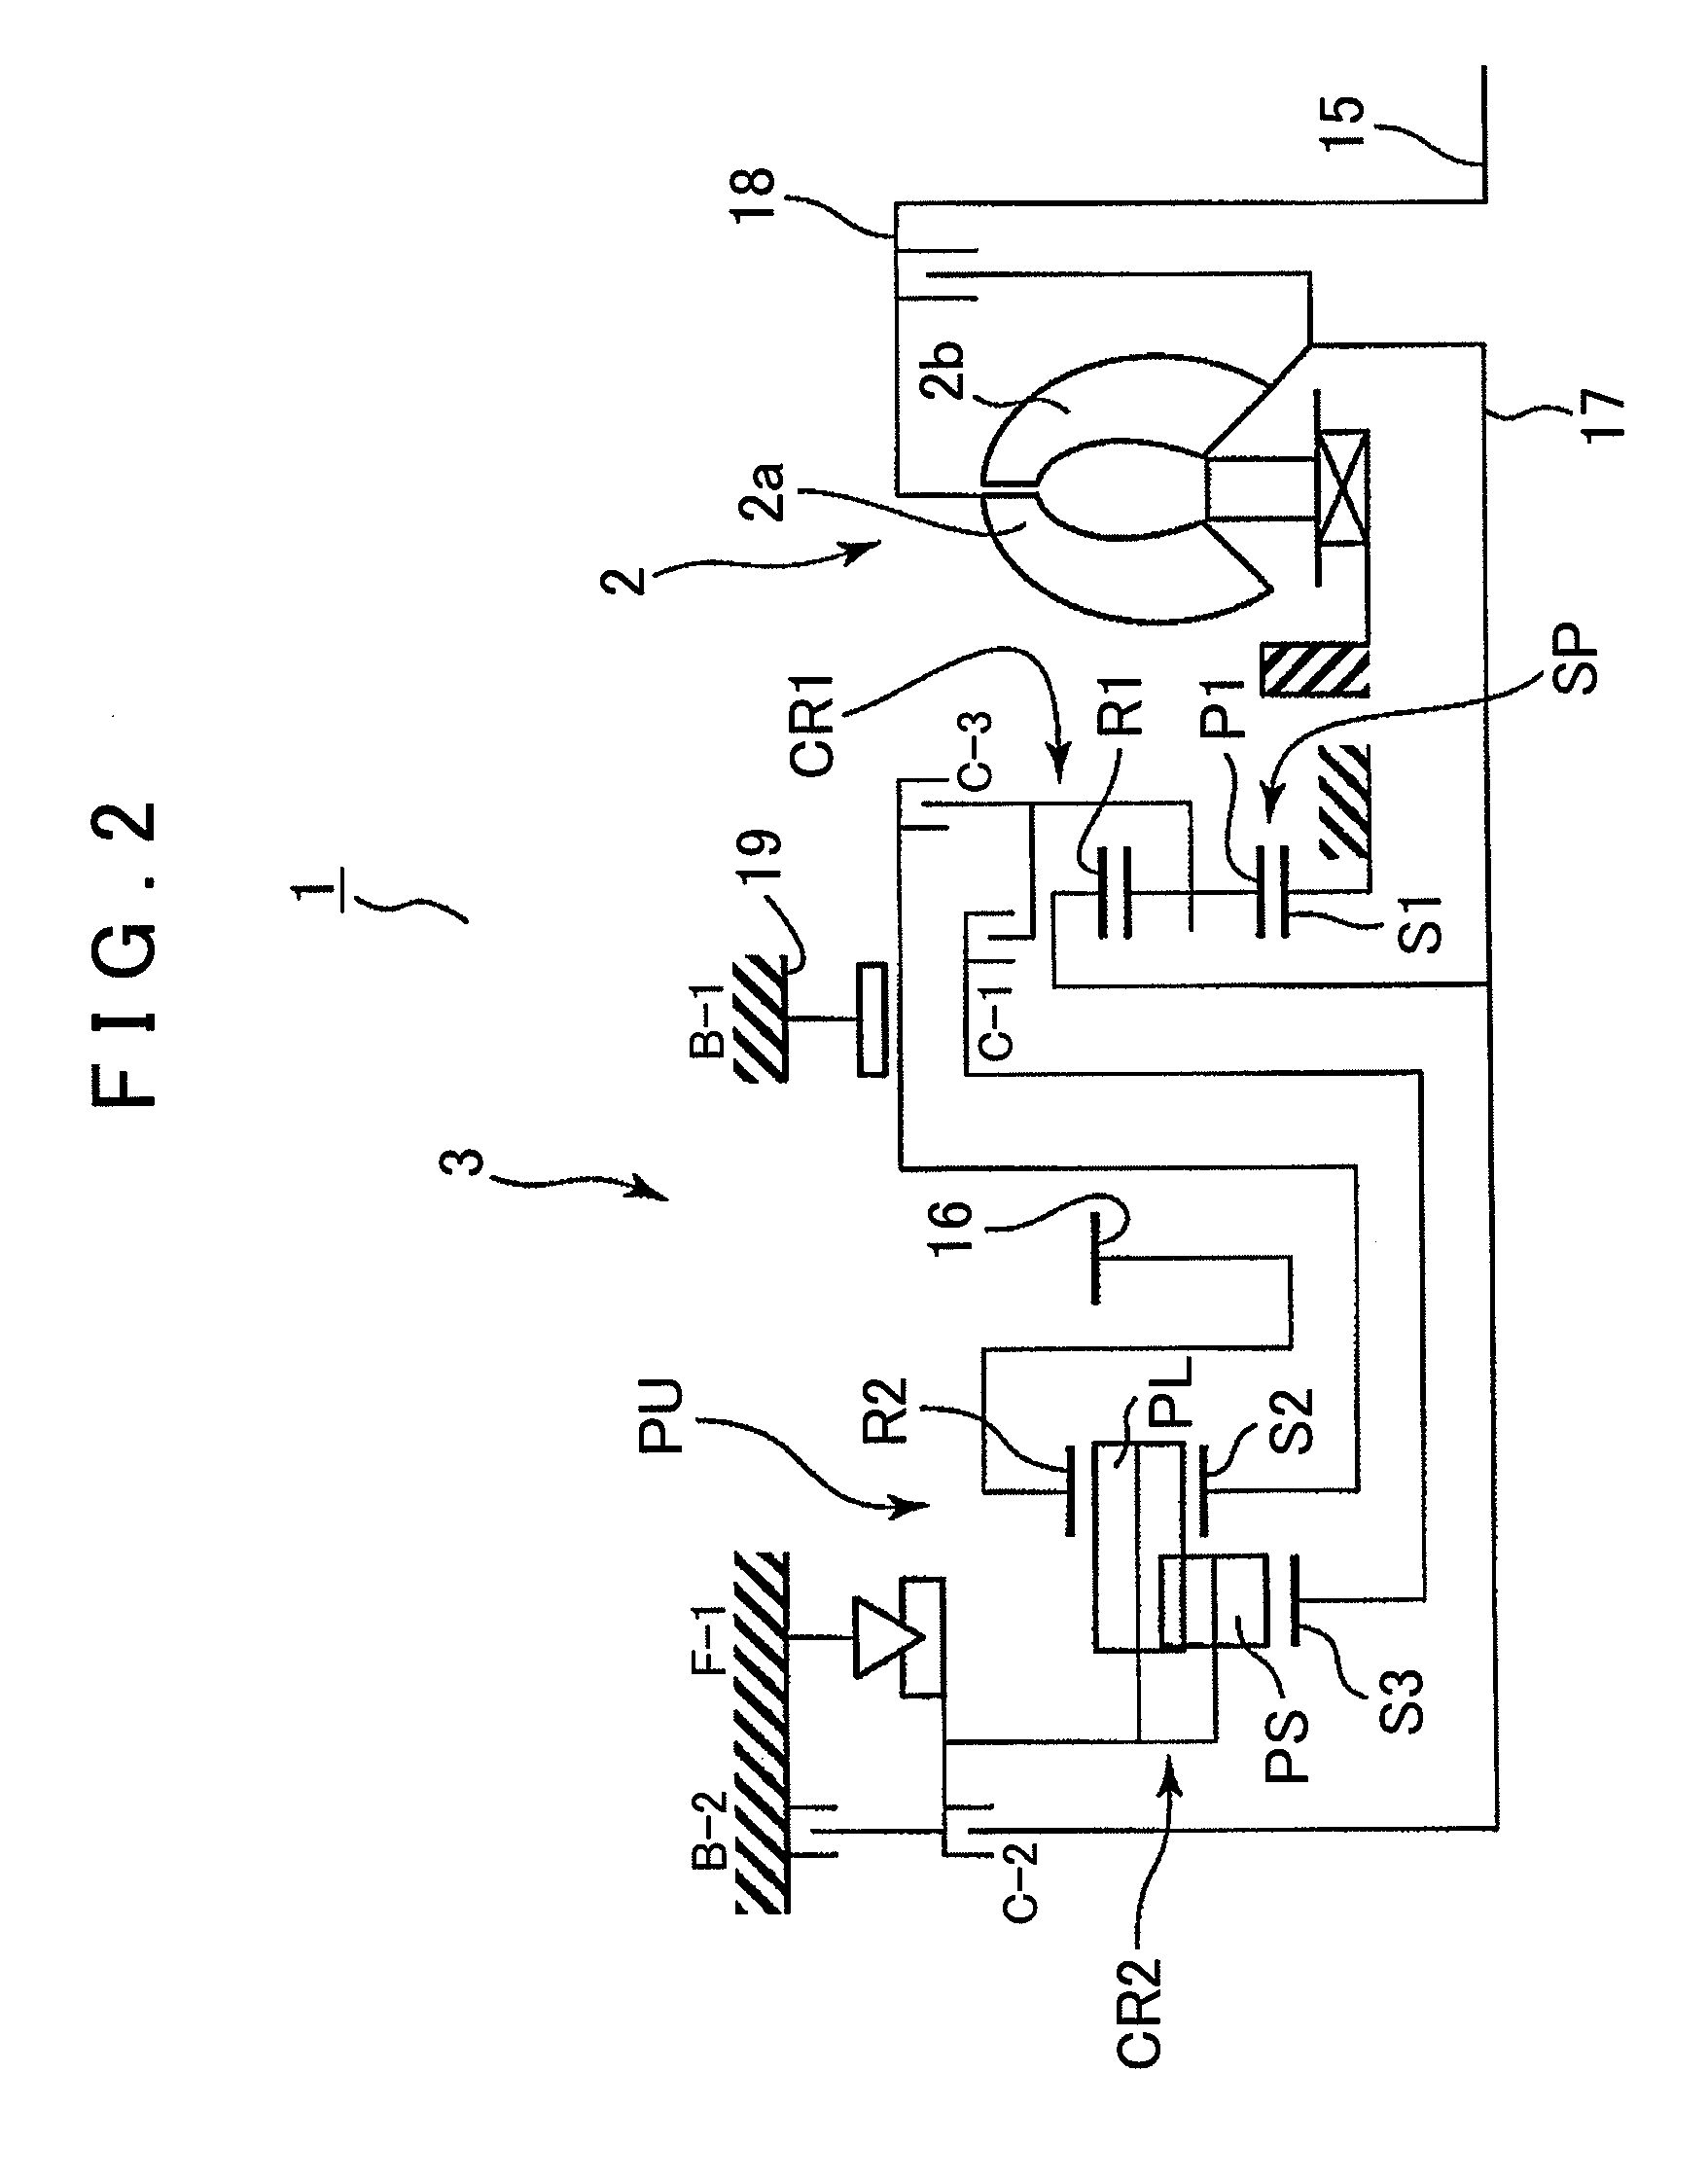 Control system for automatic transmission